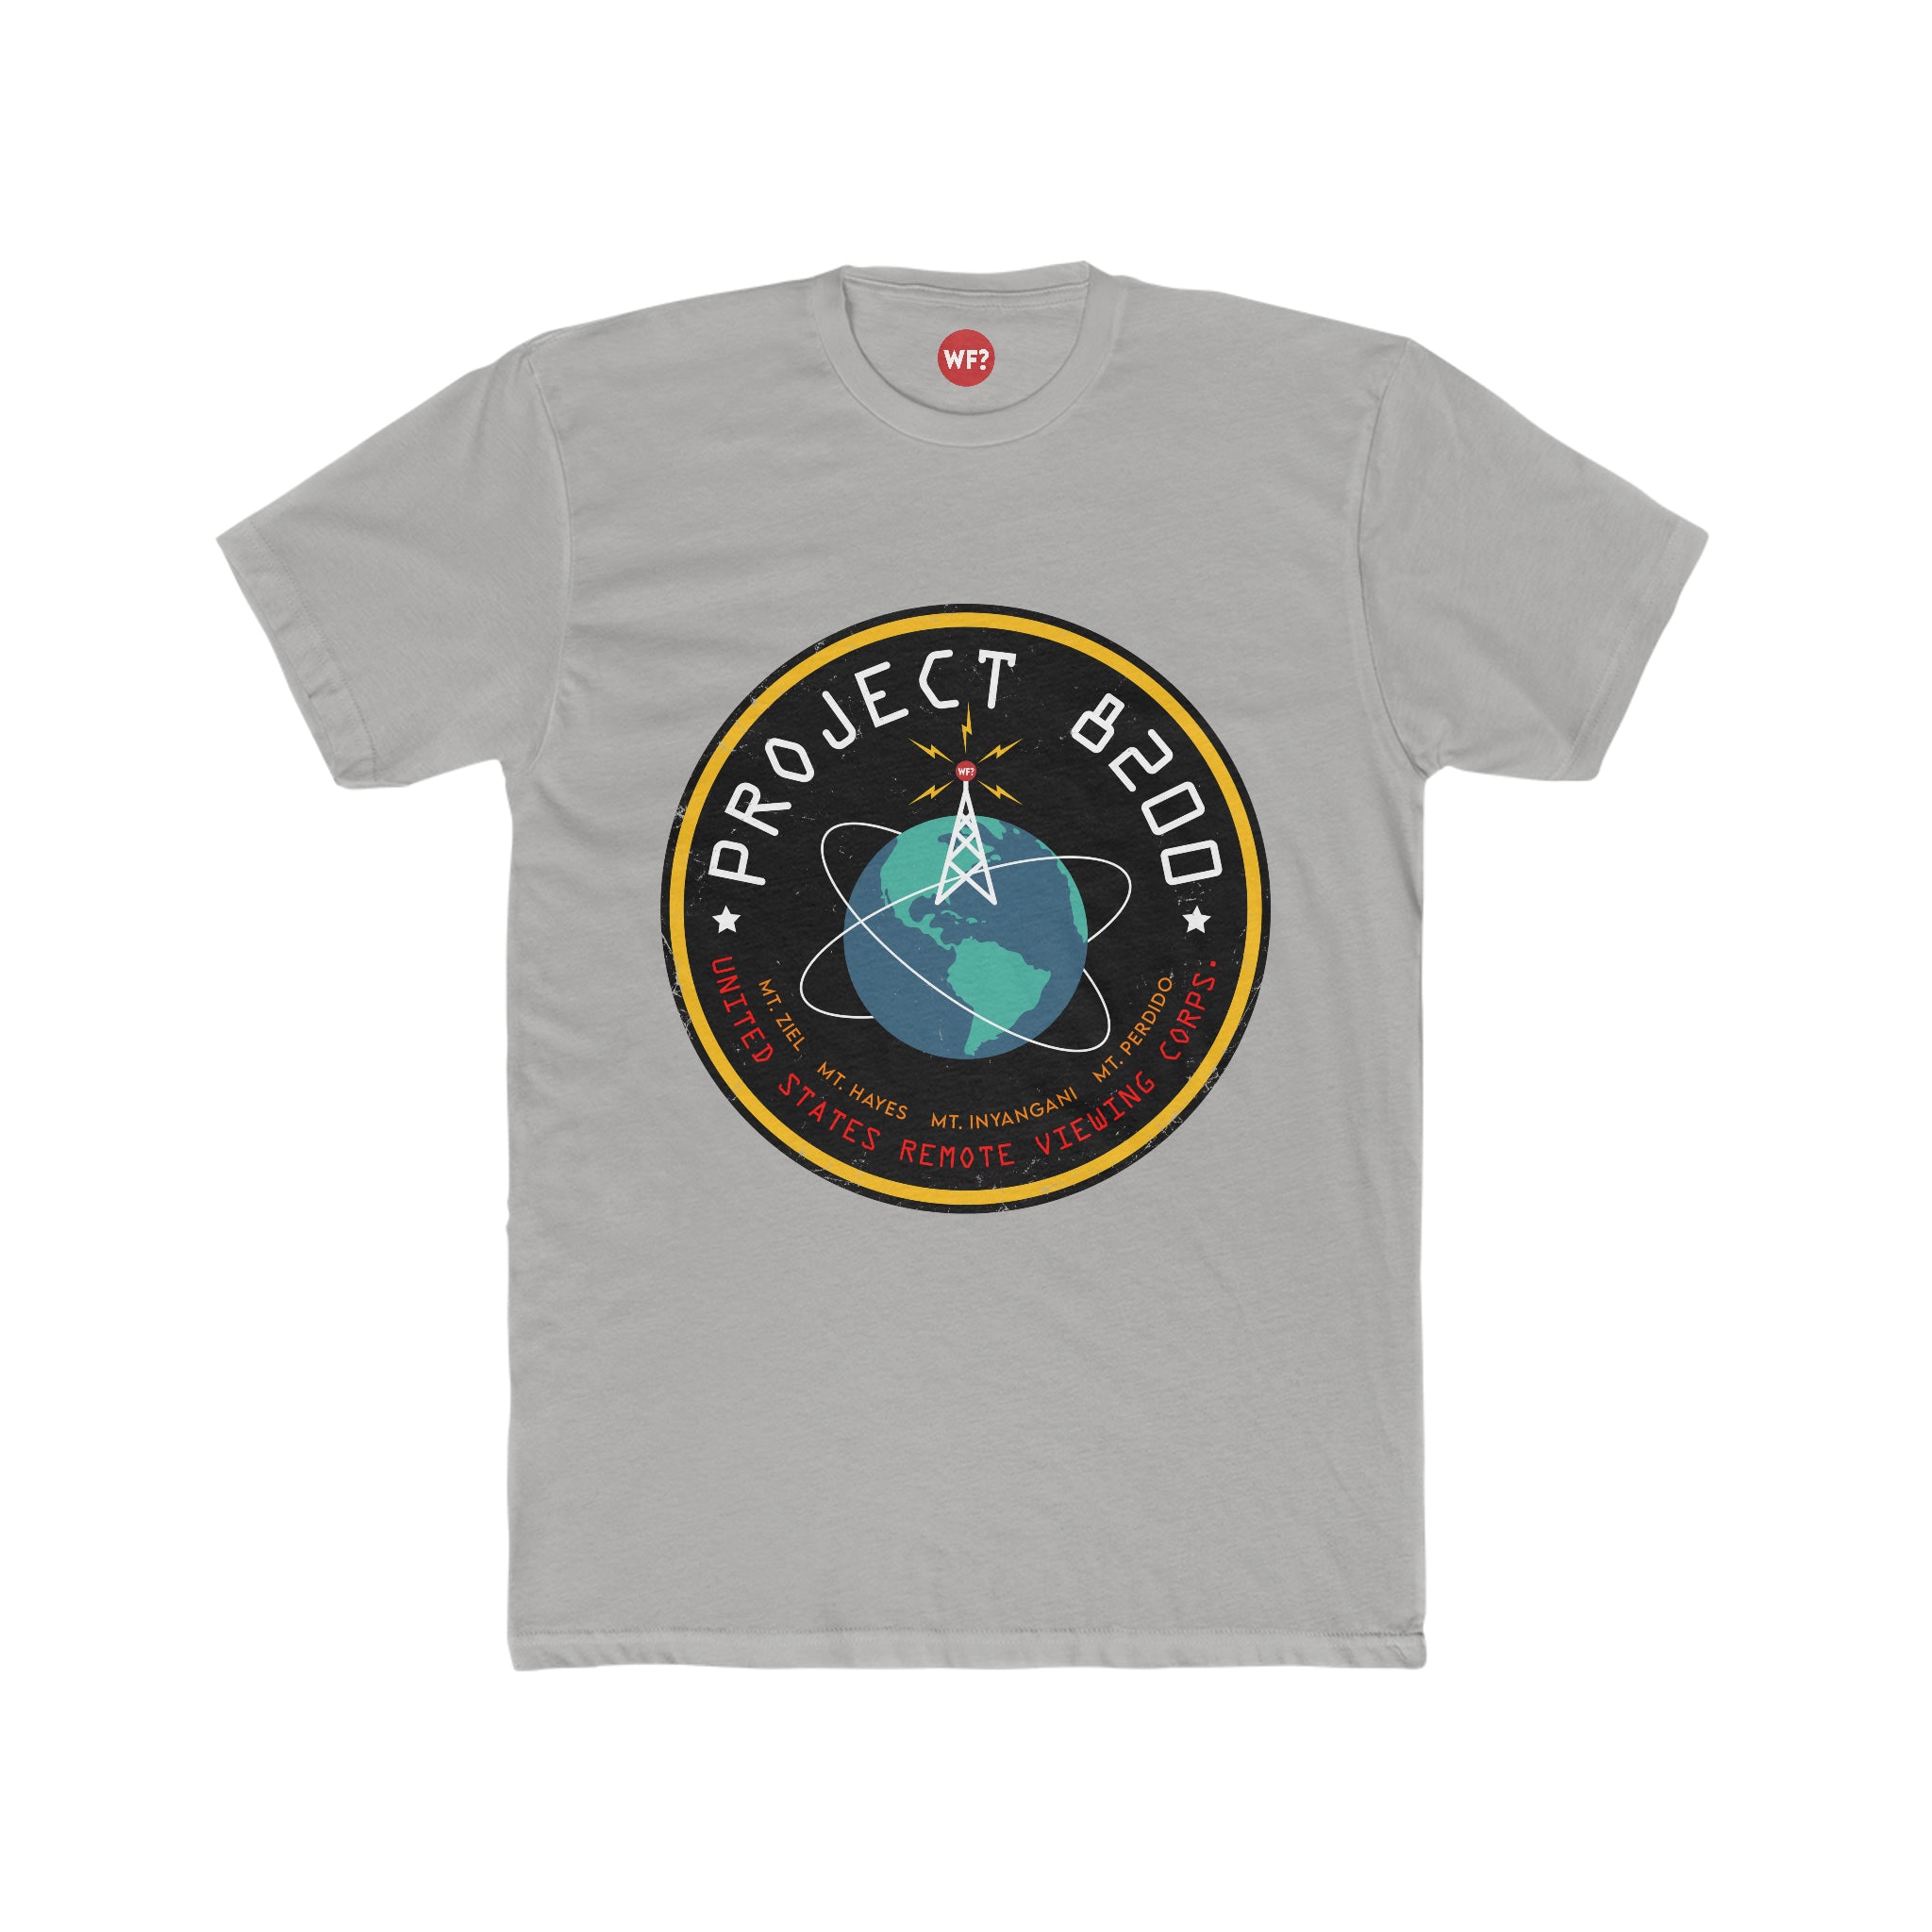 Buy solid-light-grey 01/04 Project 8200 Limited T-Shirt